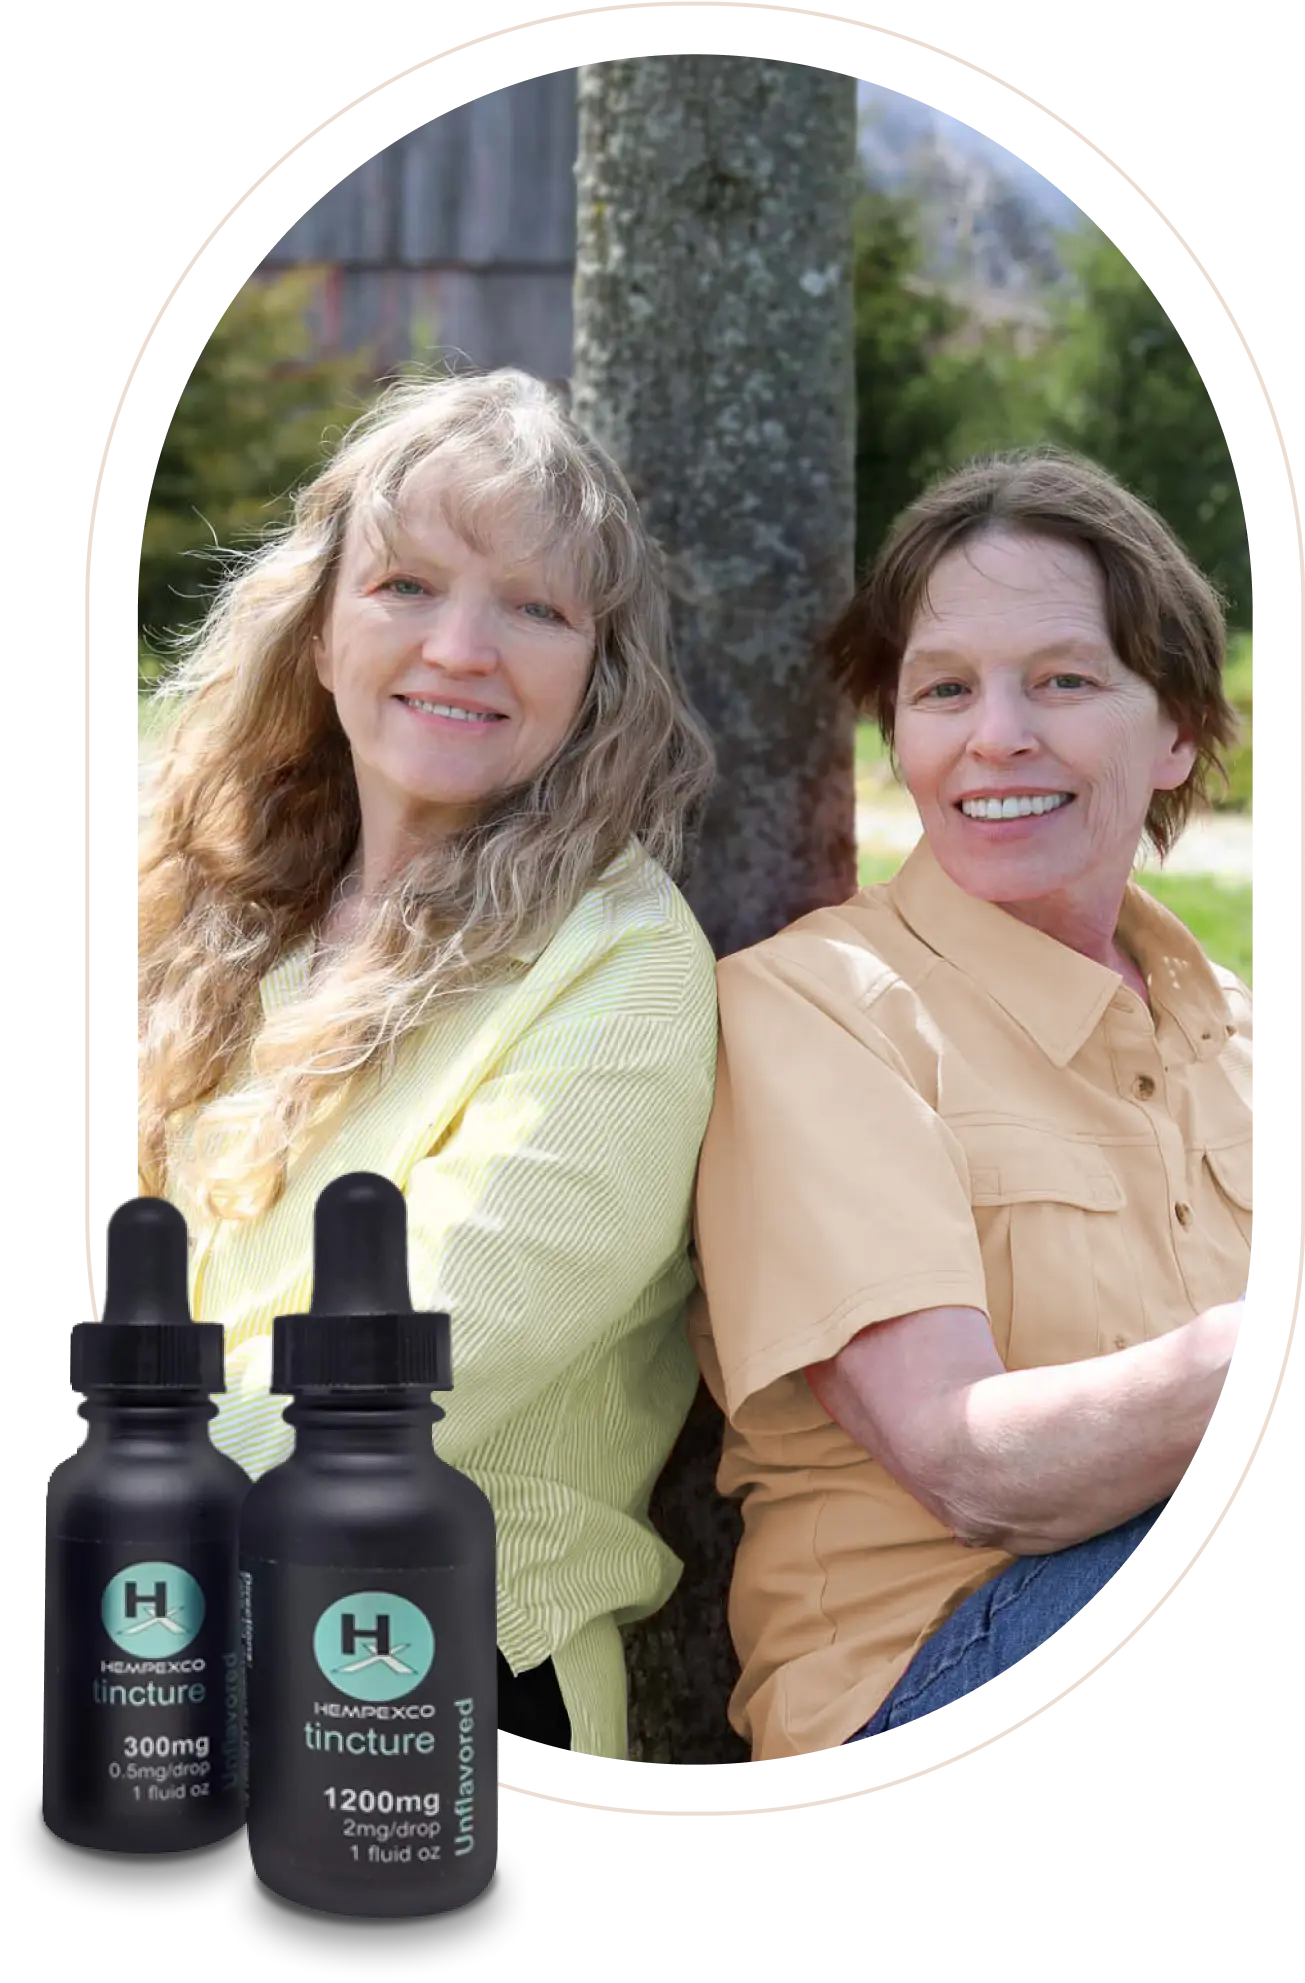 karen and linda excited for the new products